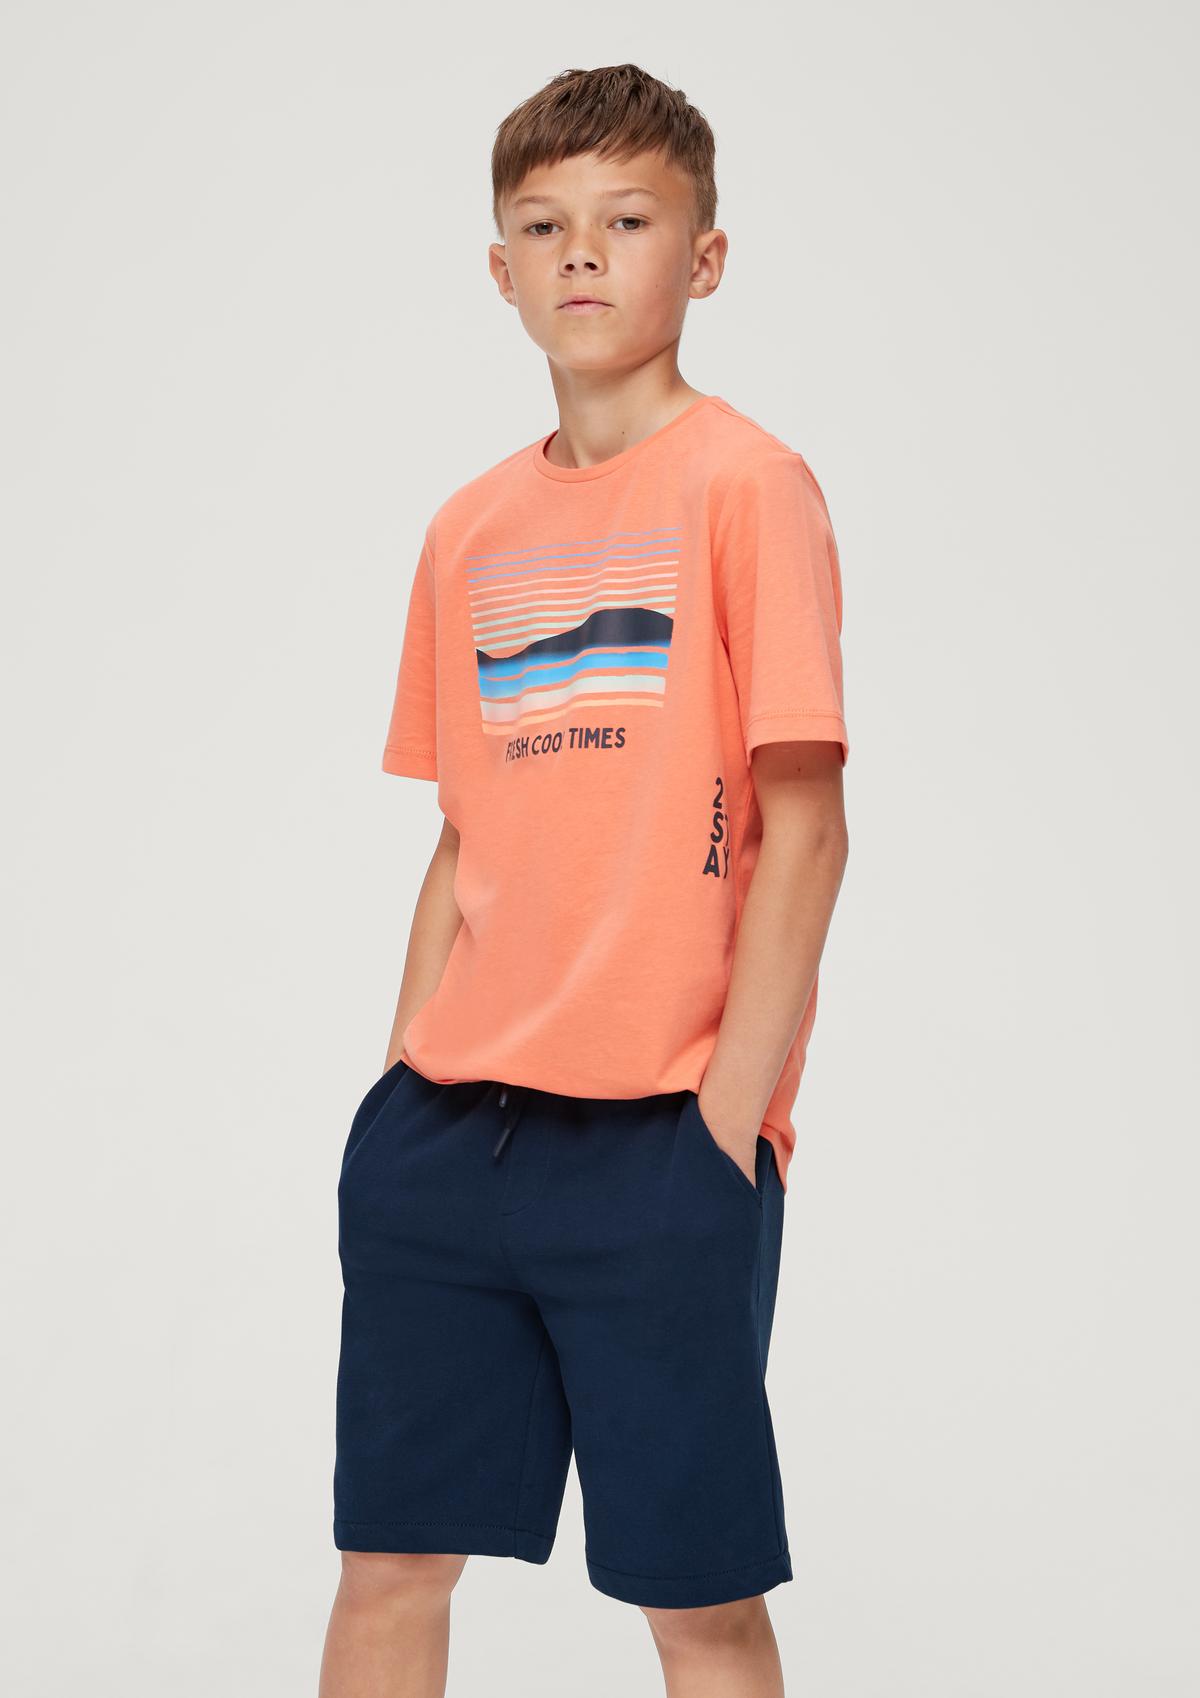 for shorts Bermuda online Find teens boys and